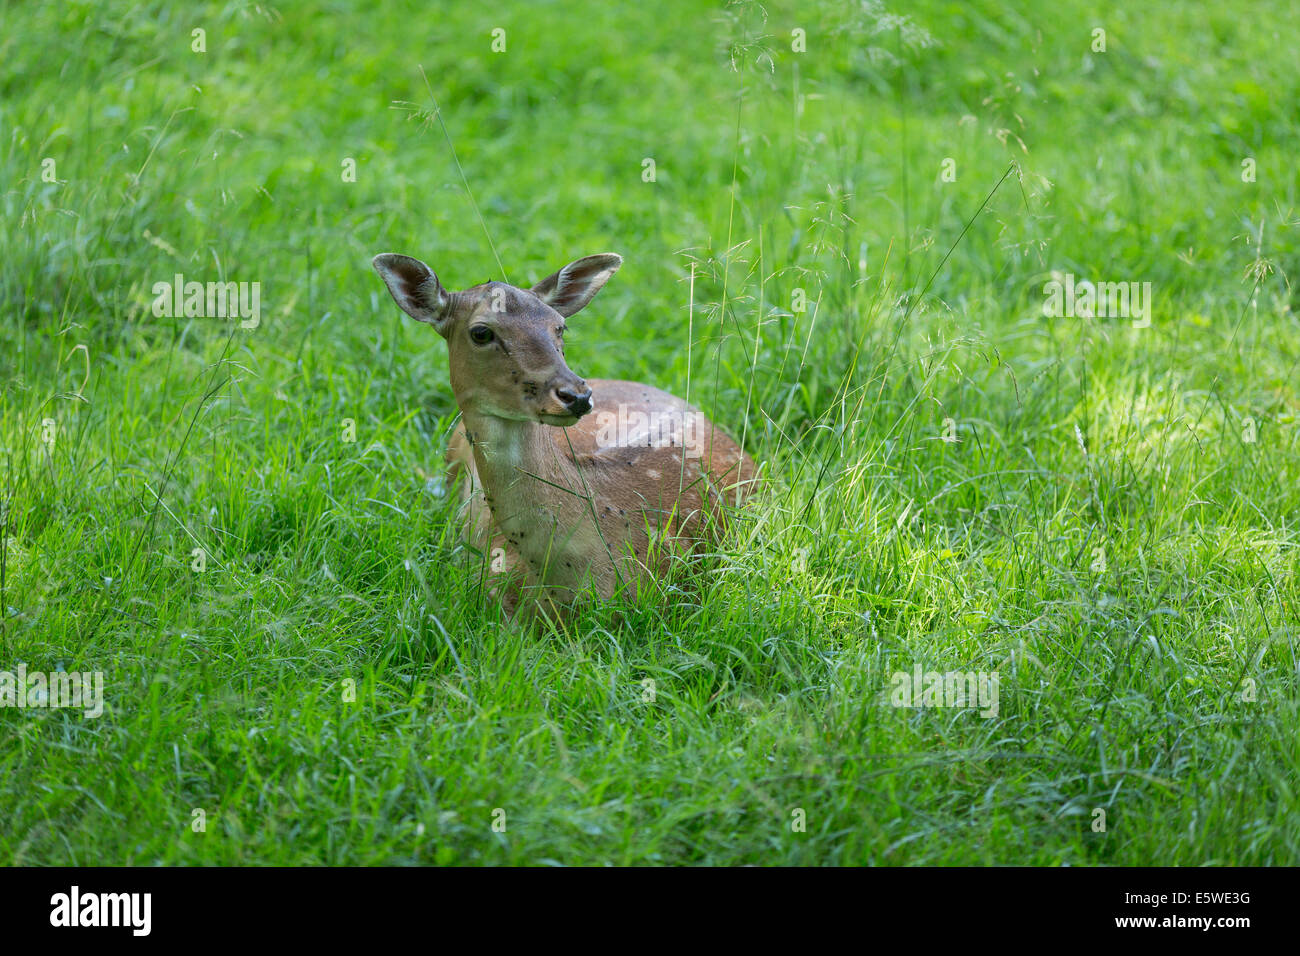 Lying fallow deer during rumination. The deer has mosquitoes on its face. Stock Photo